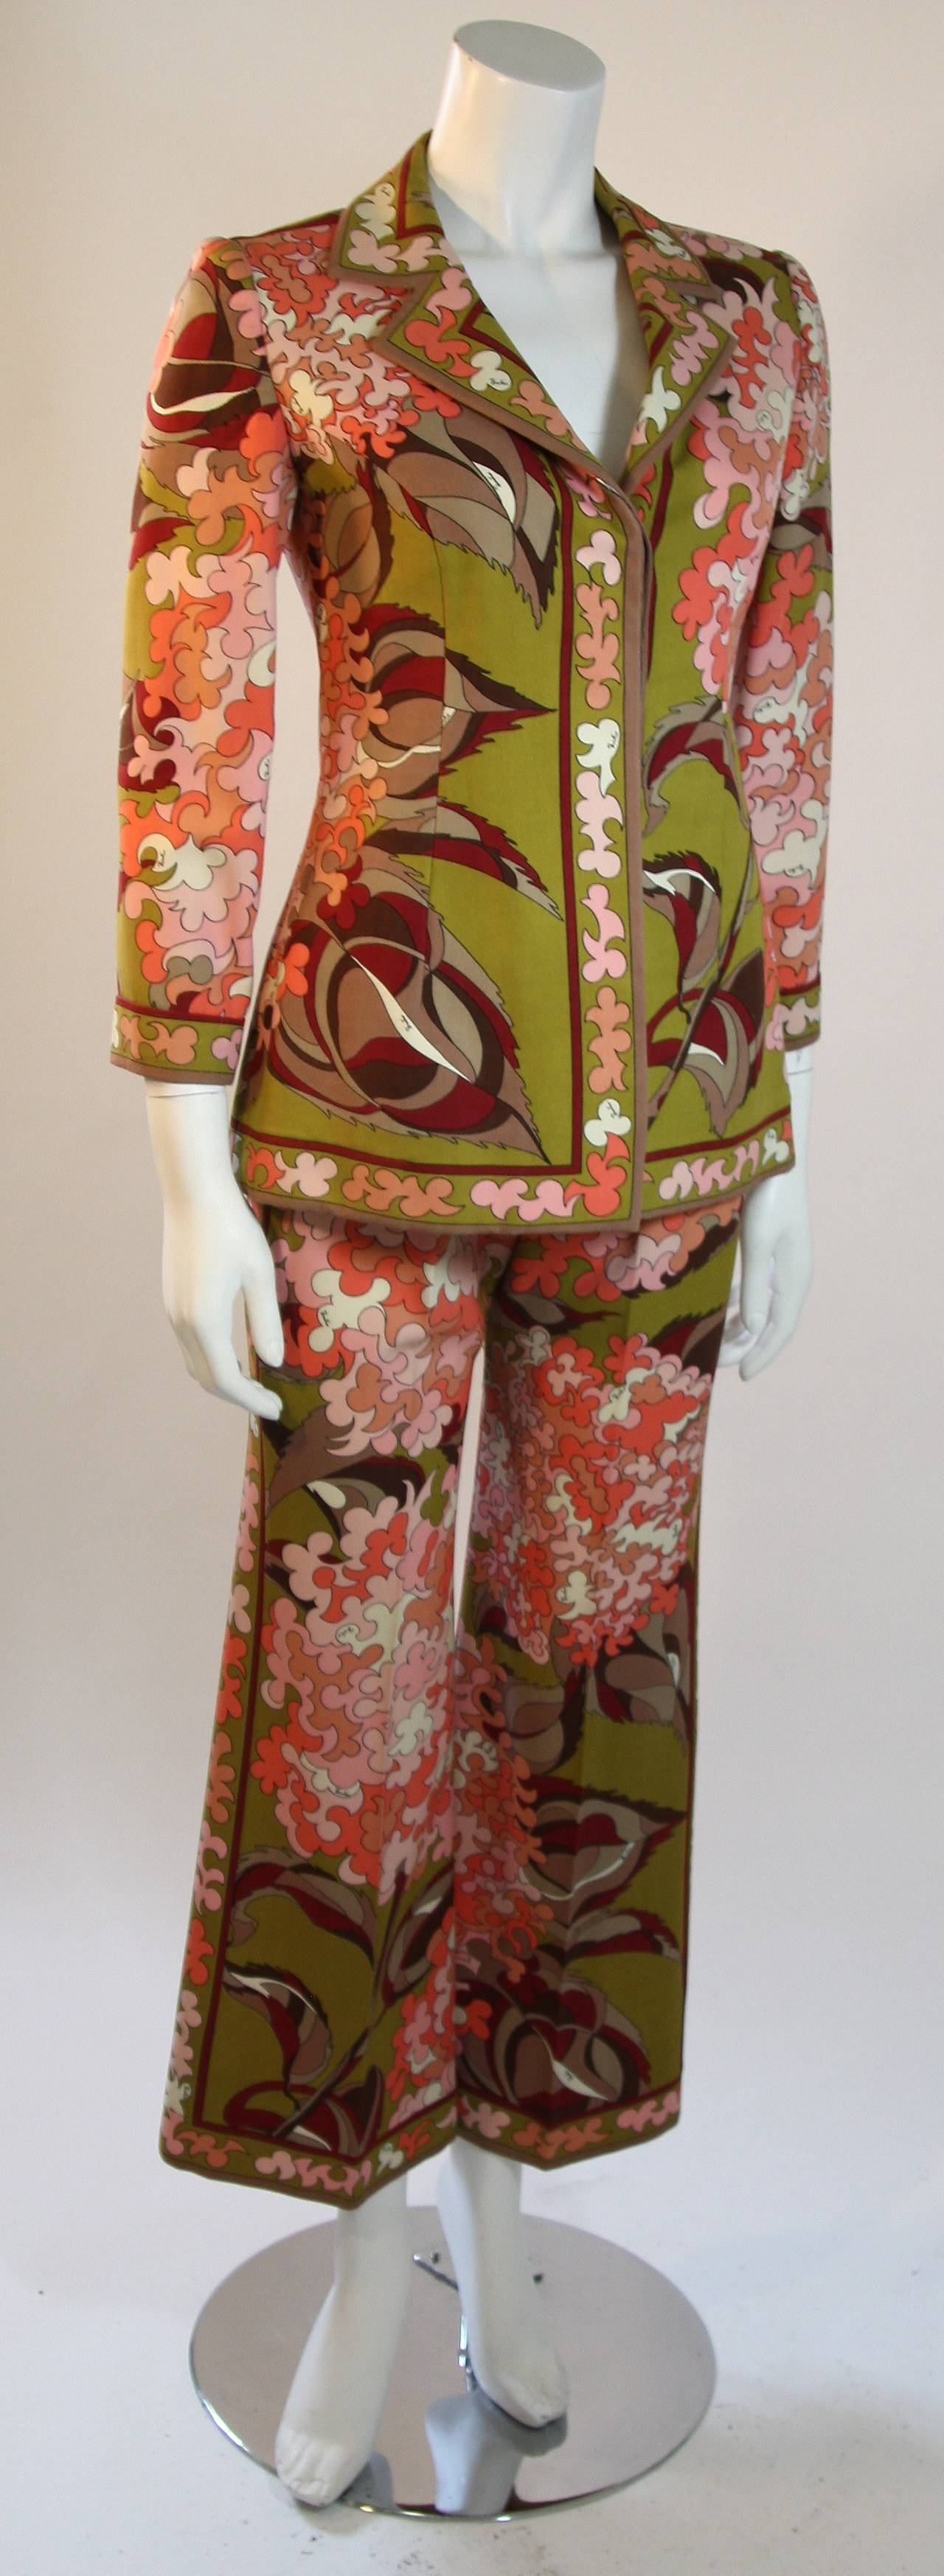 This is an Emilio Pucci suit. The suit features a center front button closure jacket and flared pants with center back zipper closure. The jacket has a few wear marks (See photographs). Made it Italy. 

Measures (Approximately)
Jacket
Length: